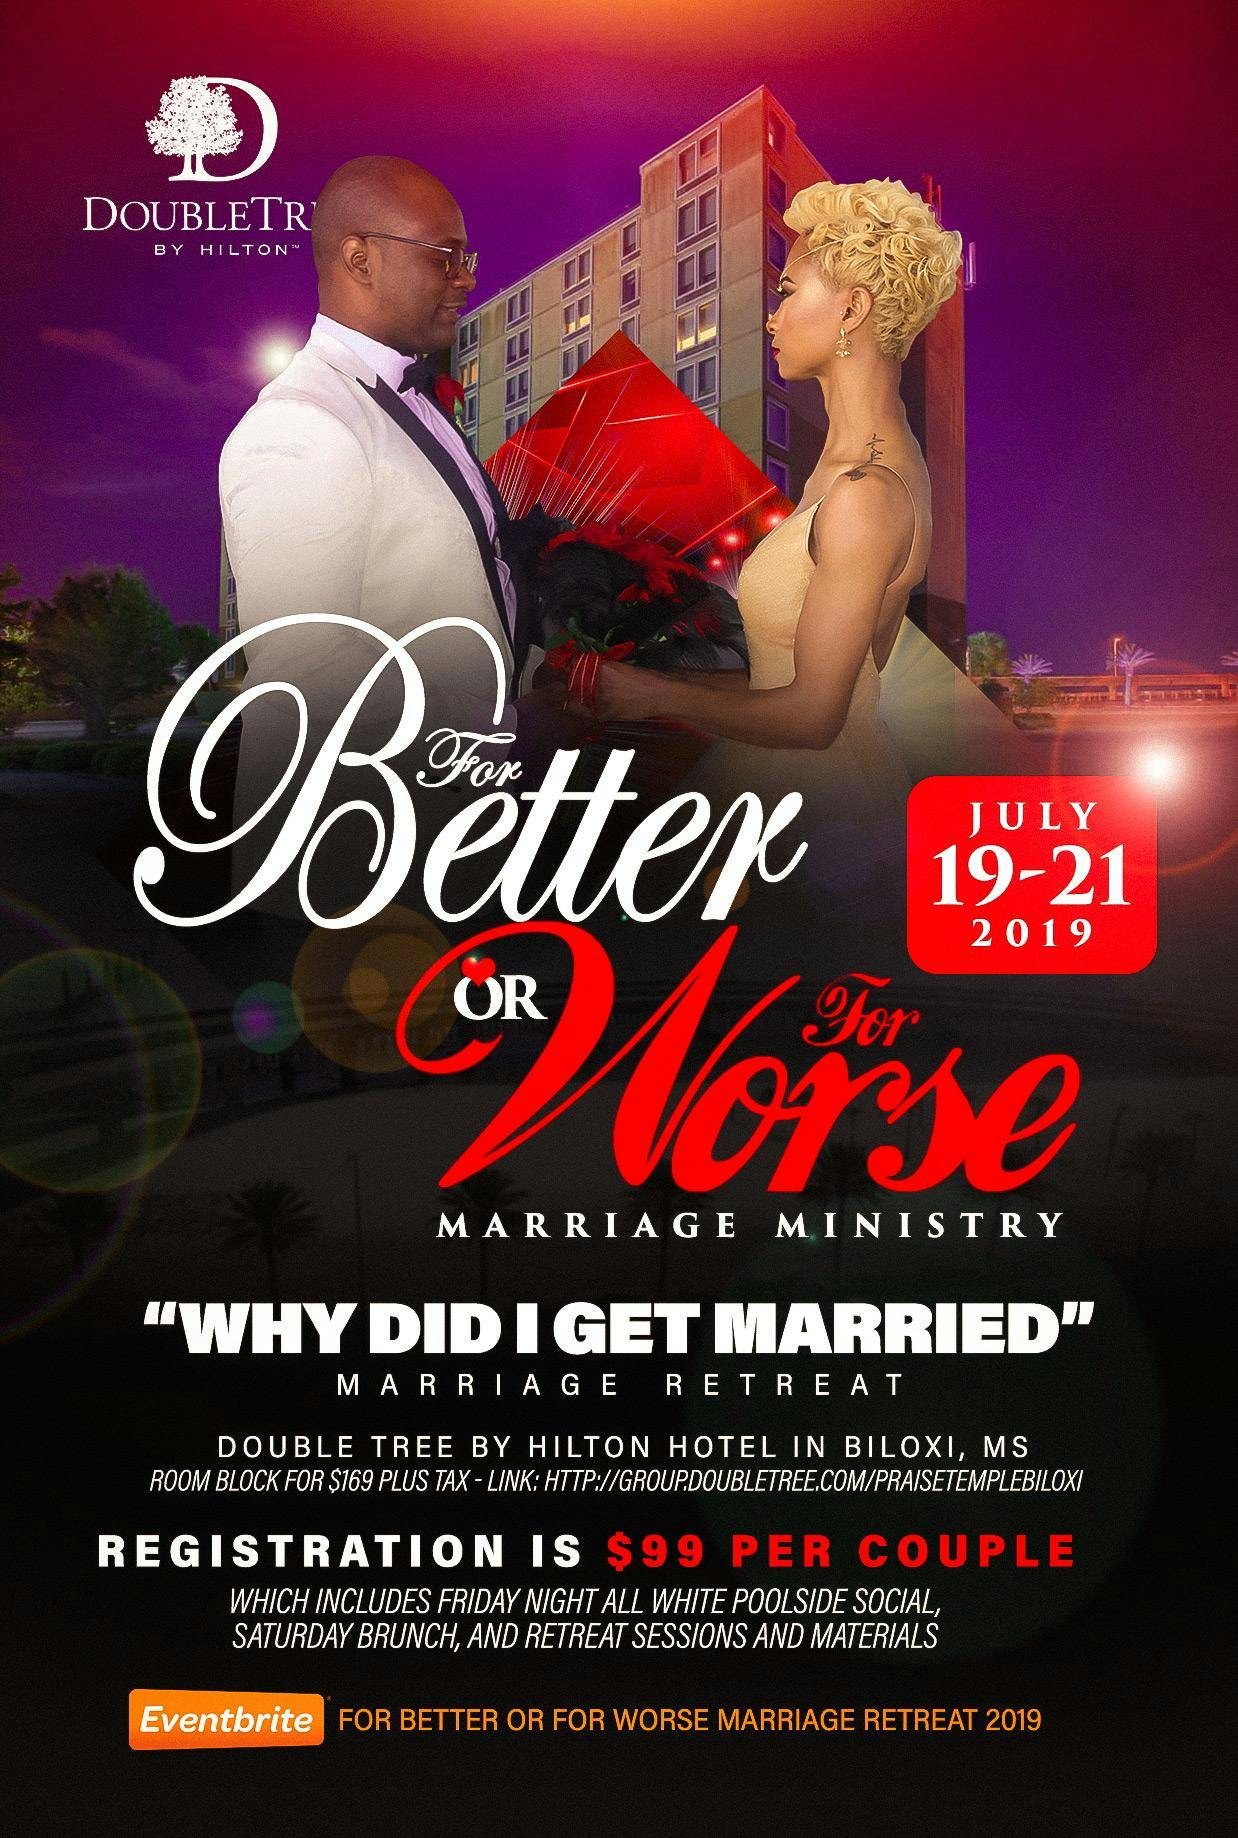 For Better or For Worse Marriage Retreat 2019